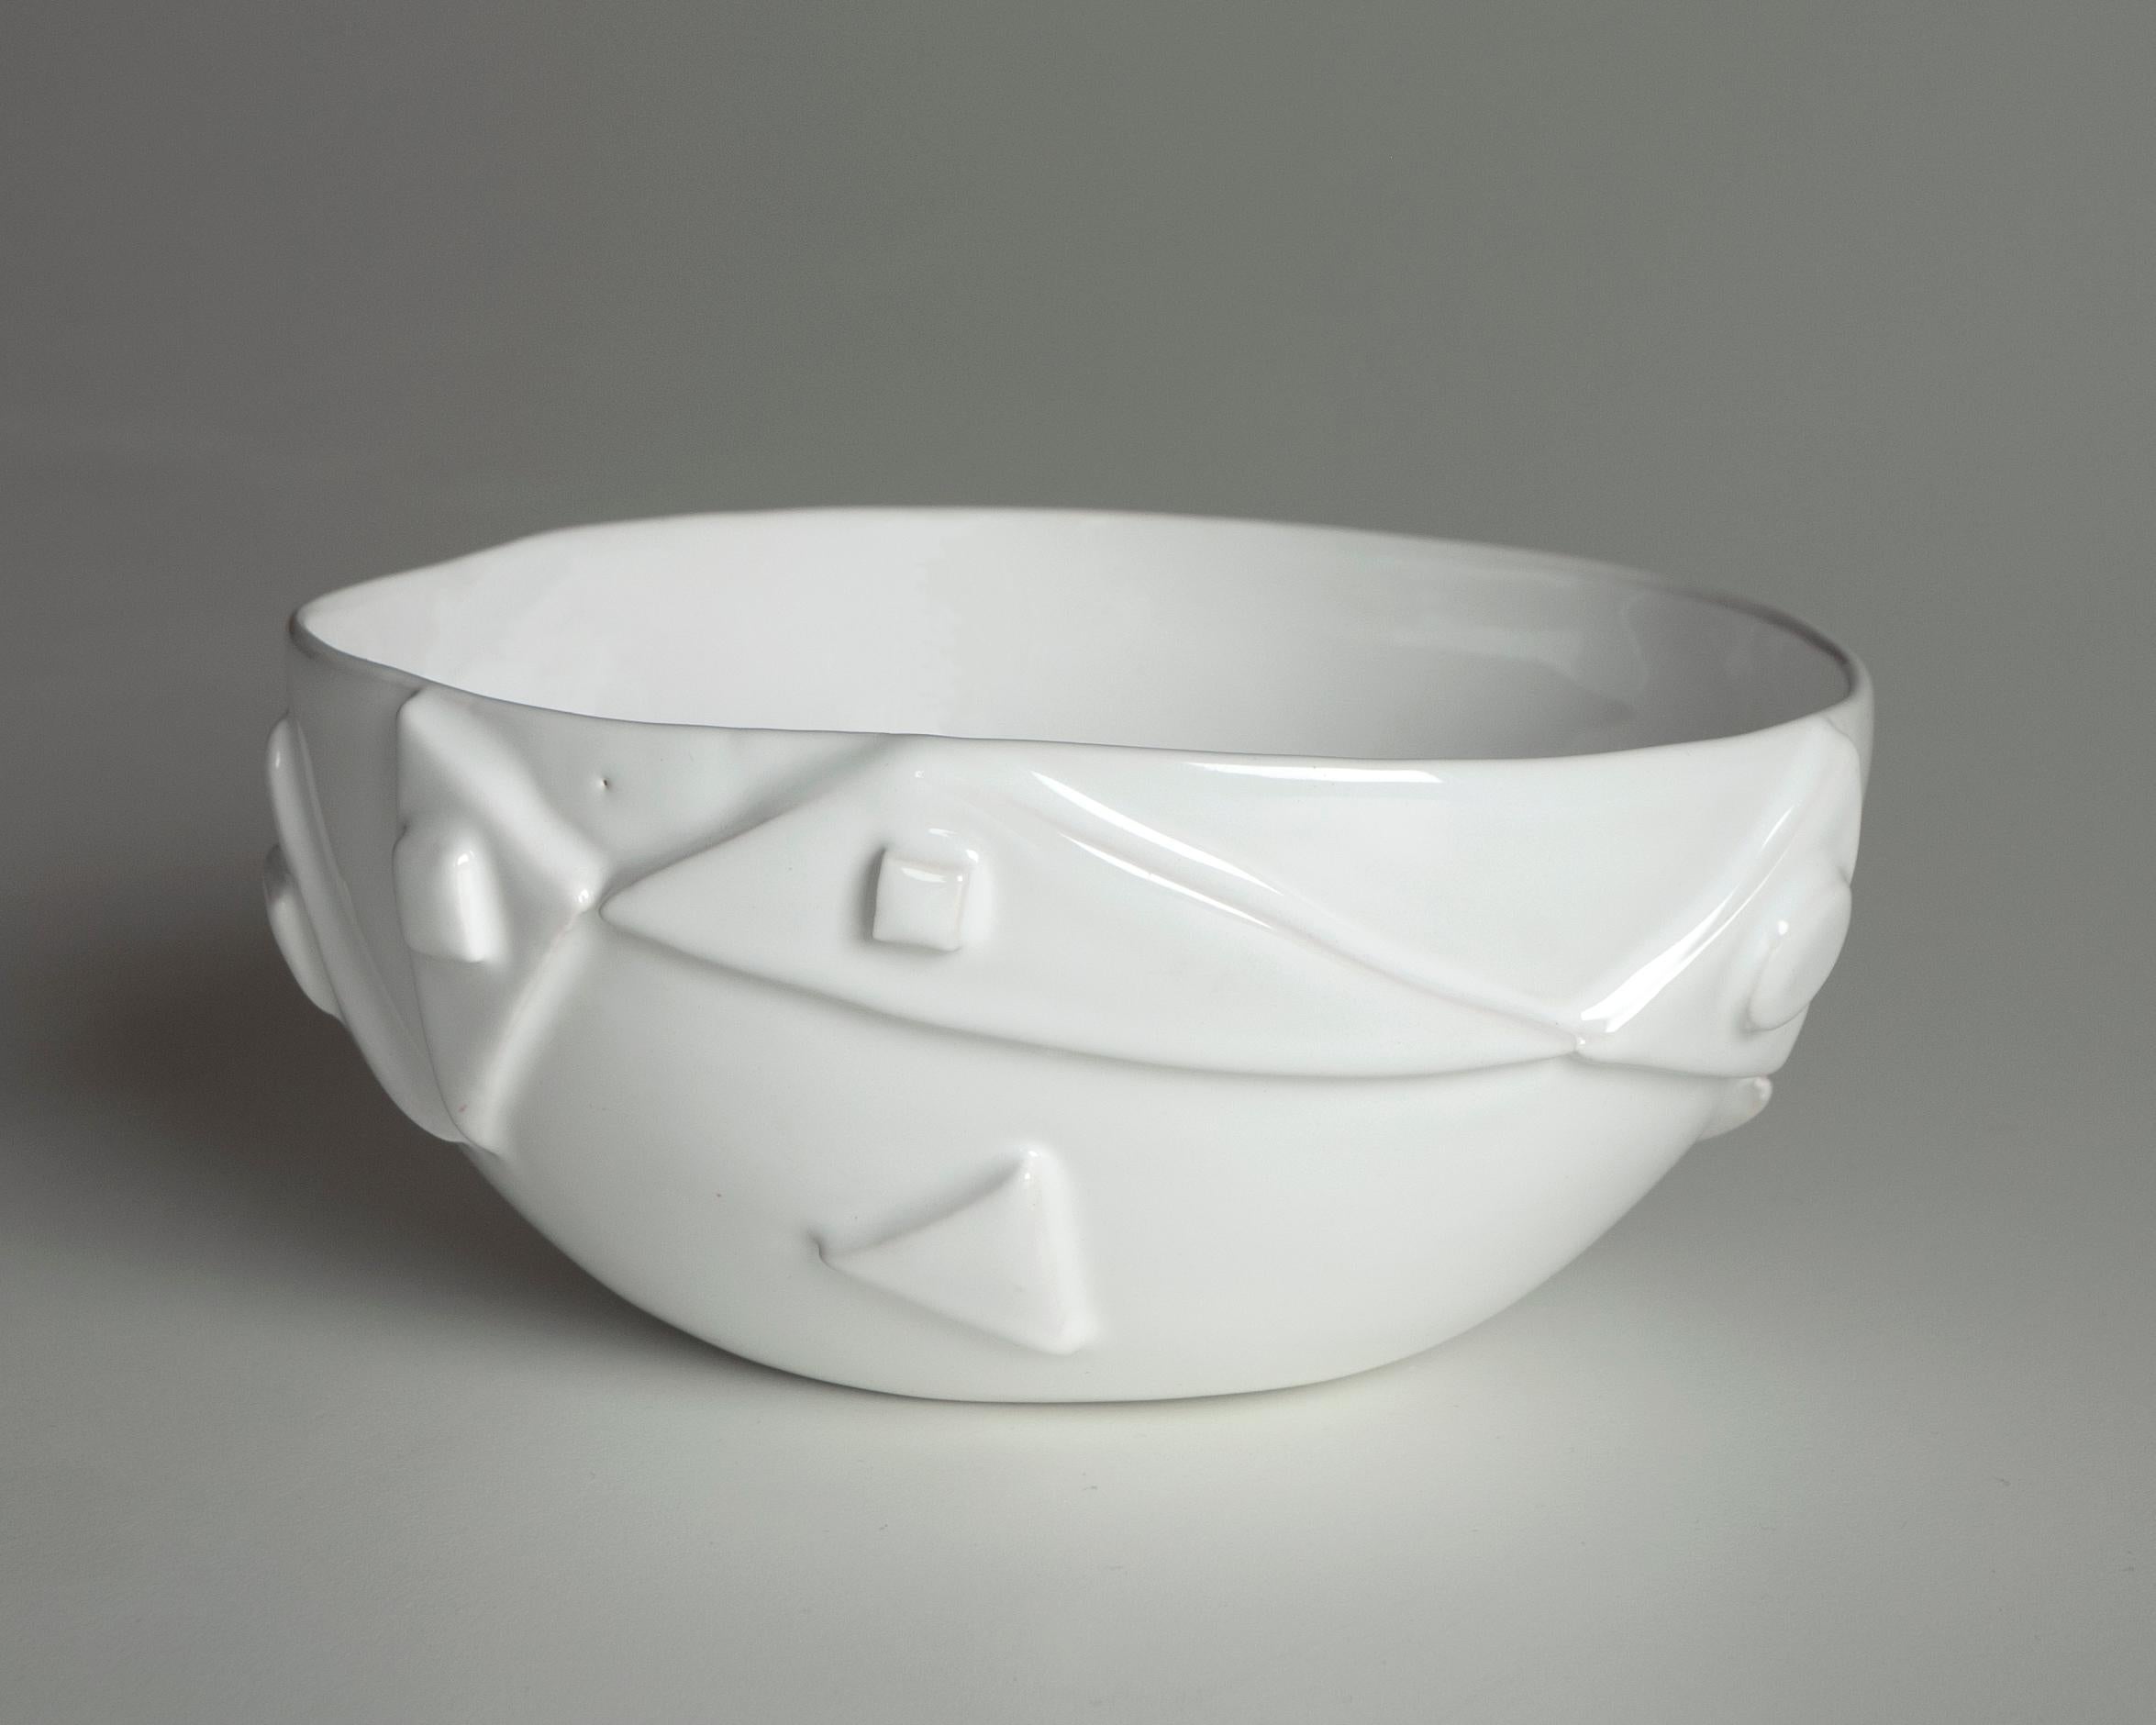 The white ceramic bowl is immersion glazed highlighting the relief decoration and its irregularities making it unique.